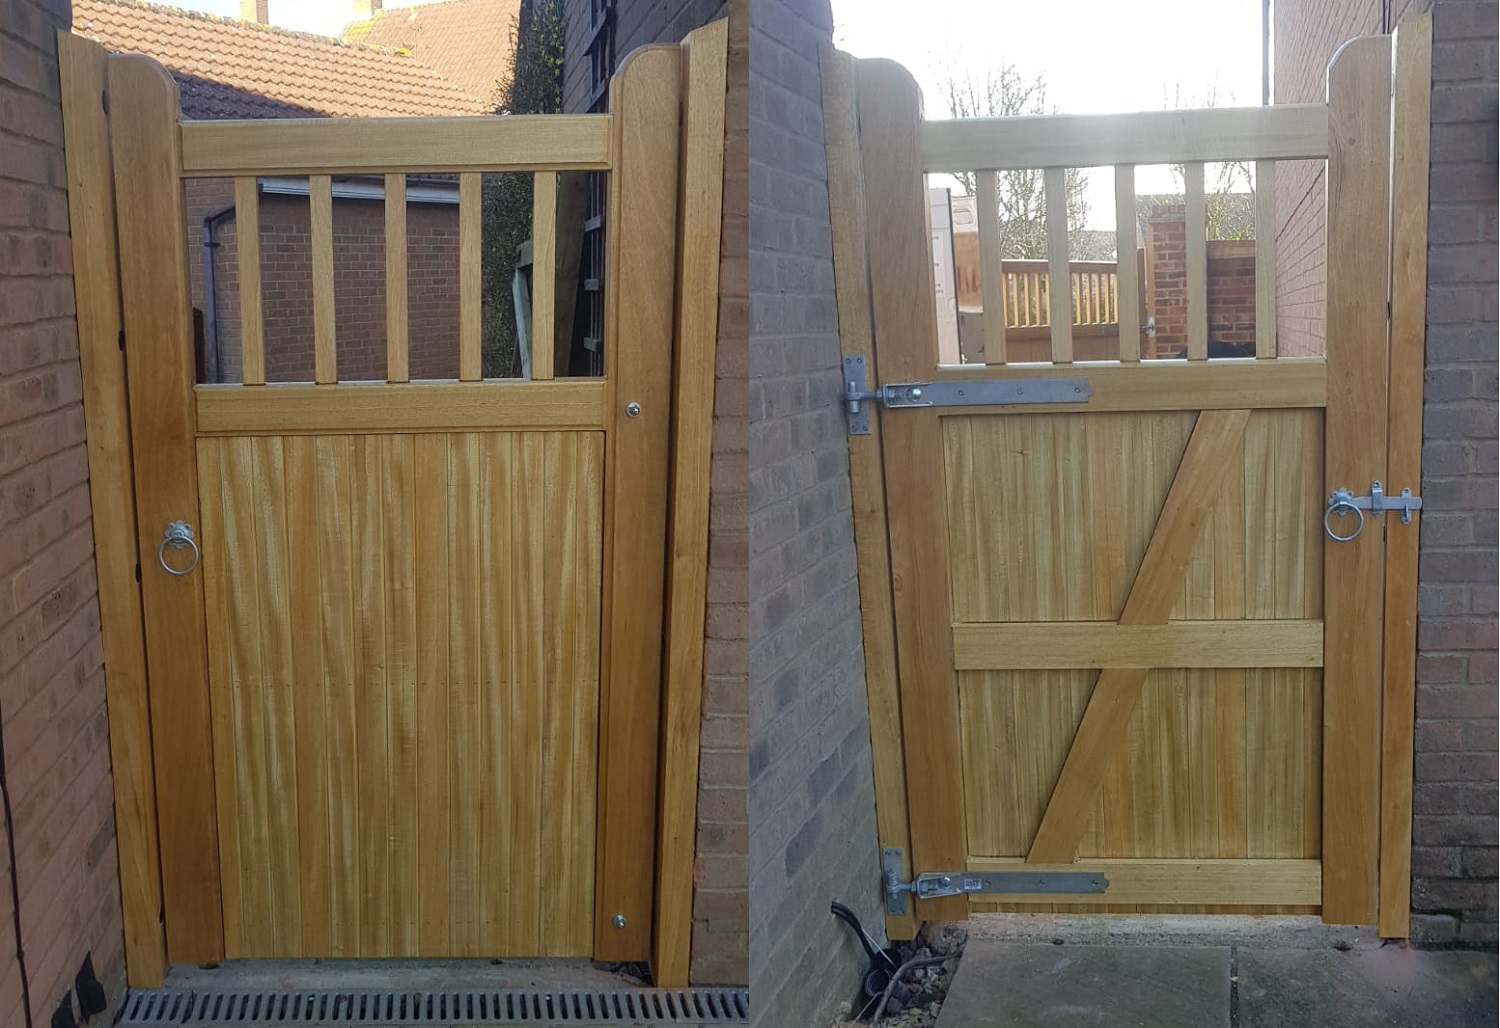 Idigbo hardwood side gate with flat top, open pale and spindles